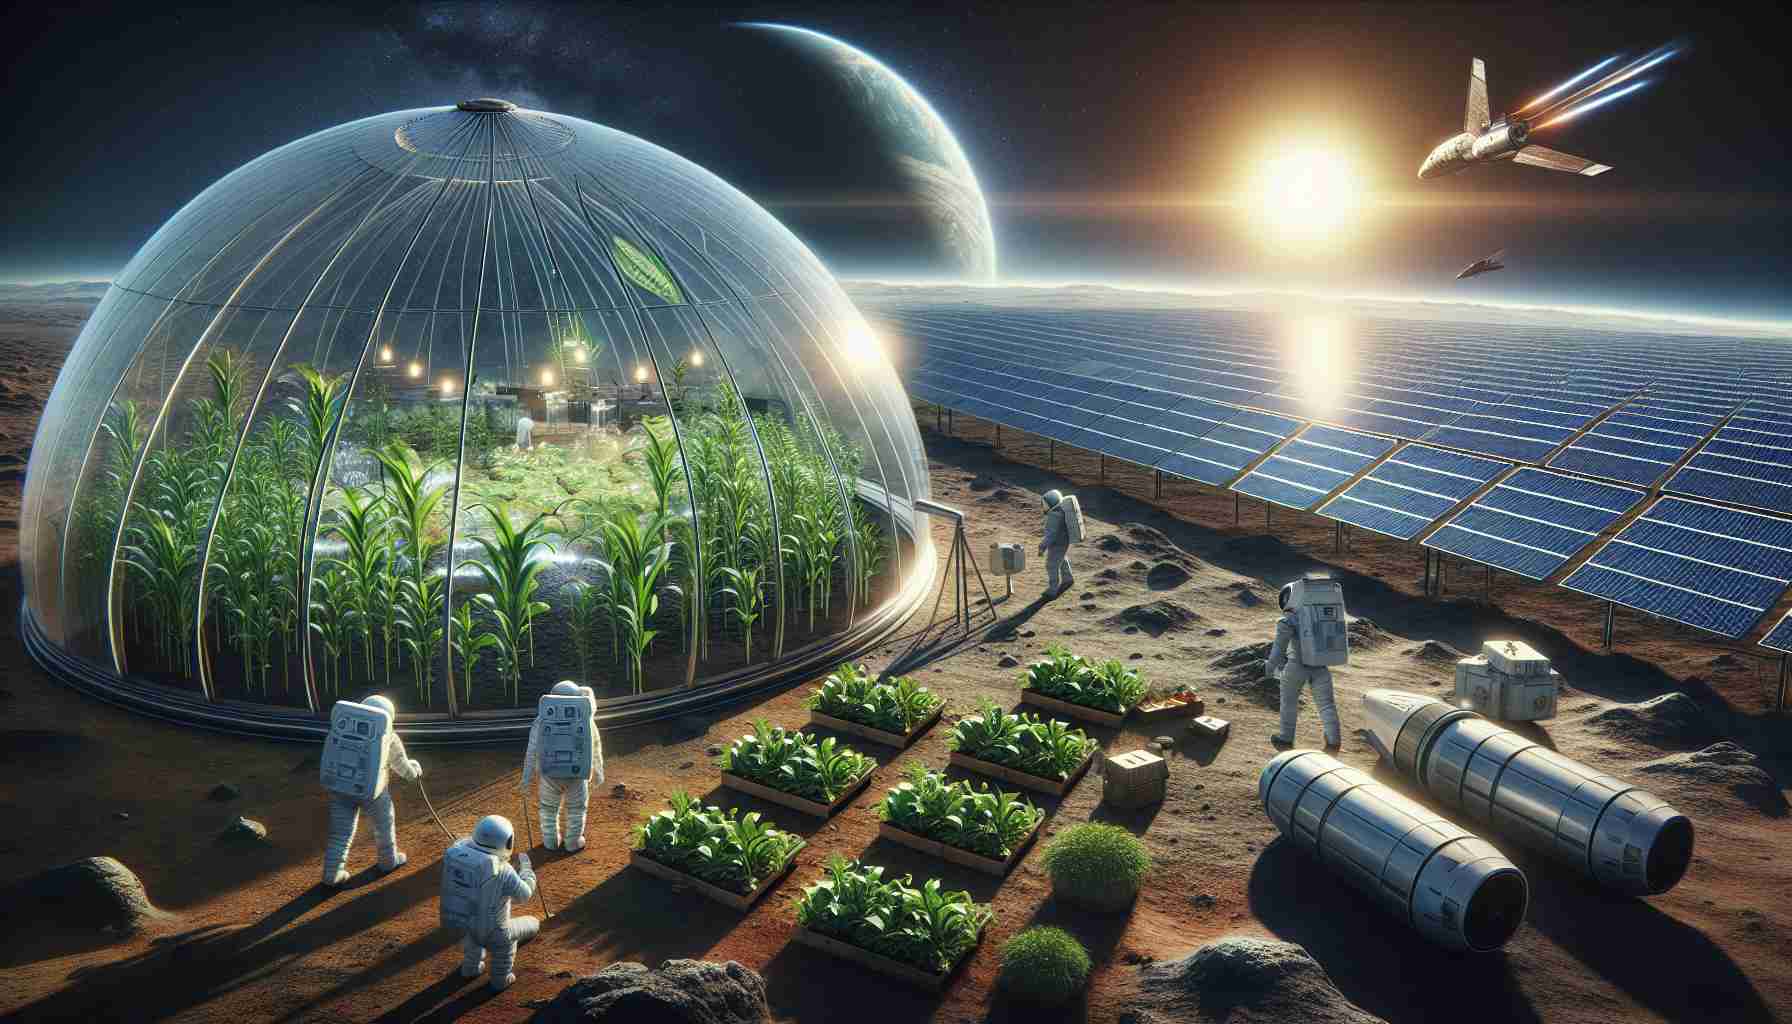 A realistic, high-definition image illustrating the concept of creating a sustainable future in space. This may feature a biodome on an alien planet, where plants and crops are being grown. A group of astronauts of different descents and genders, diligently tending to the harvested crops inside the biodome. Crisp, glossy solar panels stretch out towards the sun, absorbing its energy for the spaceship which is seen docked on the planet's surface near the biodome. Insinuating humans responsibly using resources not of our planet, ensuring the longevity of human exploration and survival in outer space.